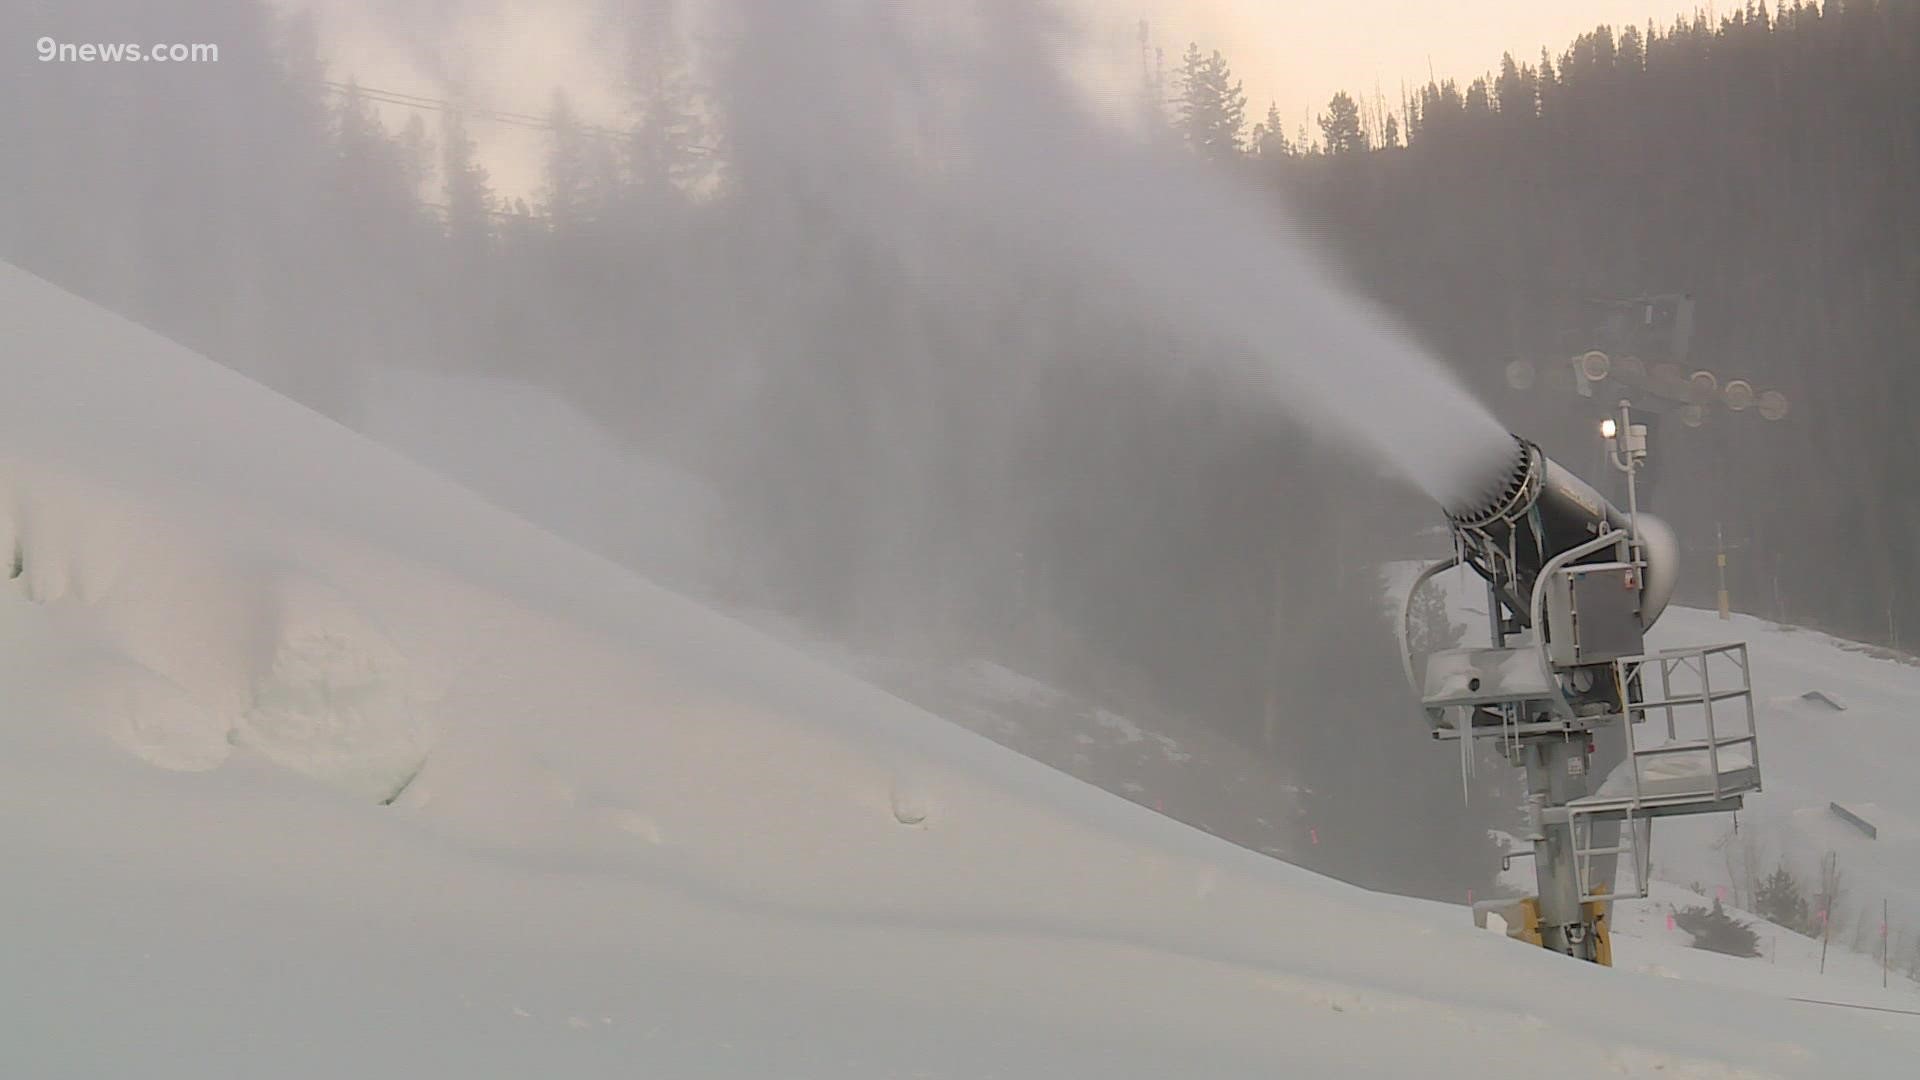 Several Next viewers wondered where Colorado ski resorts get the water to make snow, especially when moisture is low like it is in 2021.